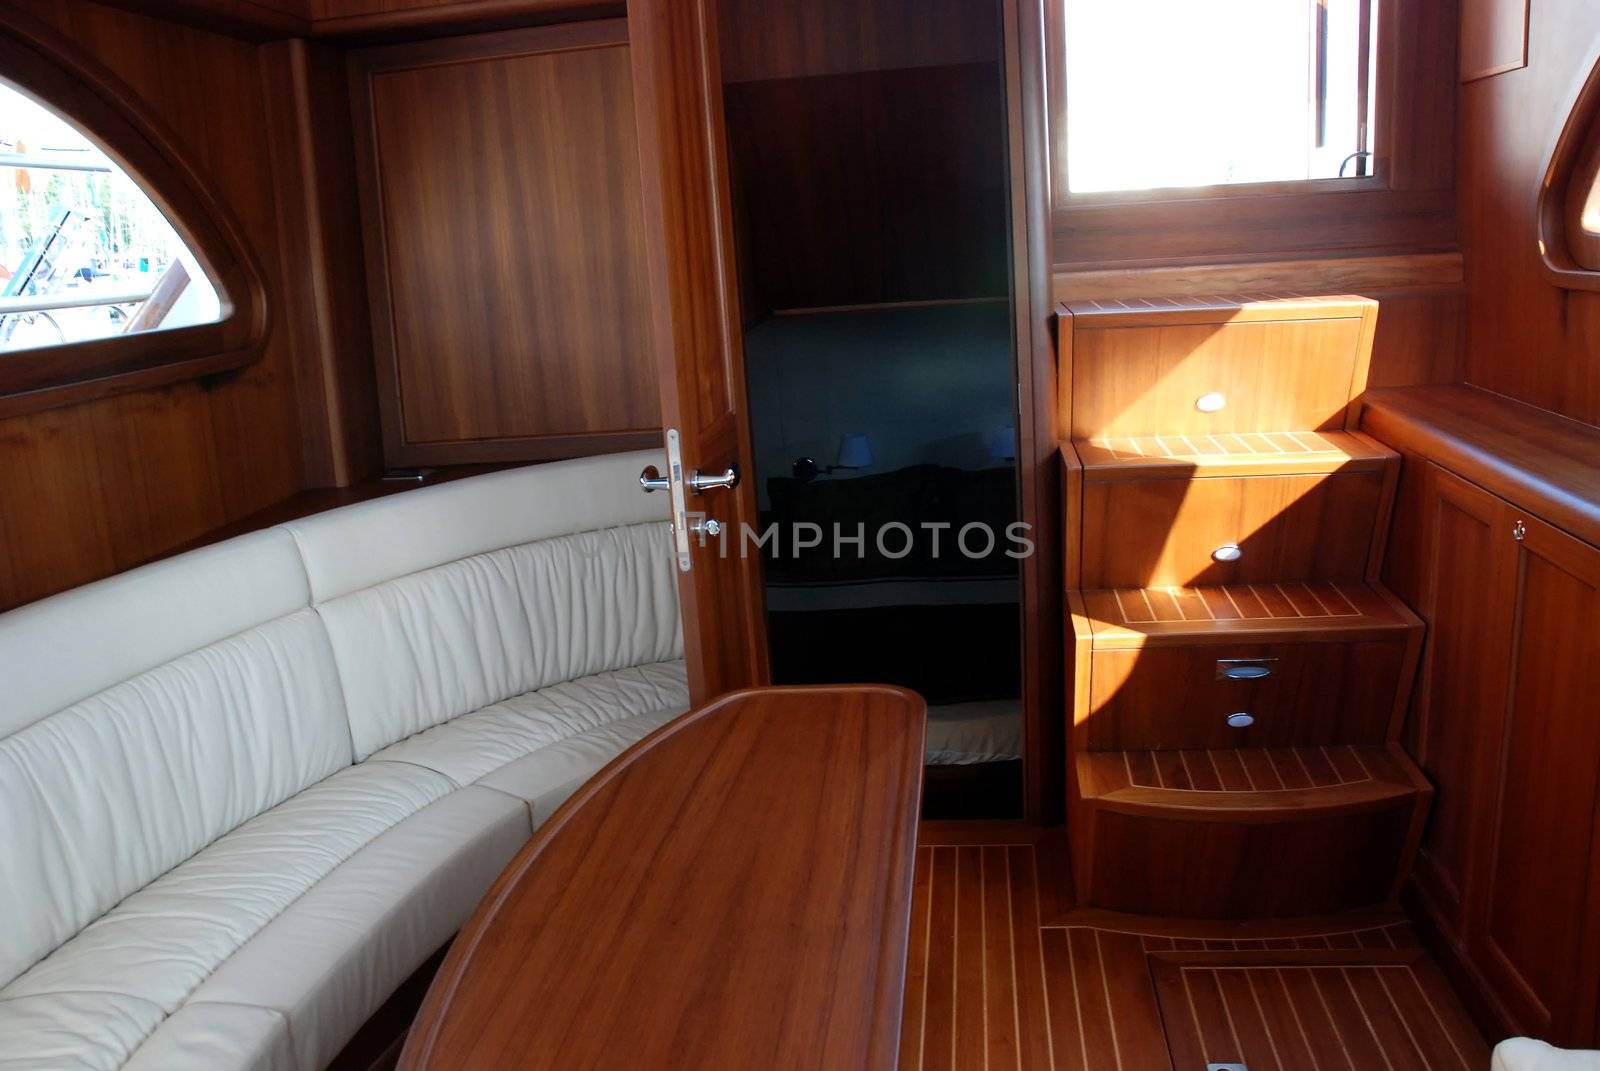 Luxury sail boat interior by candan